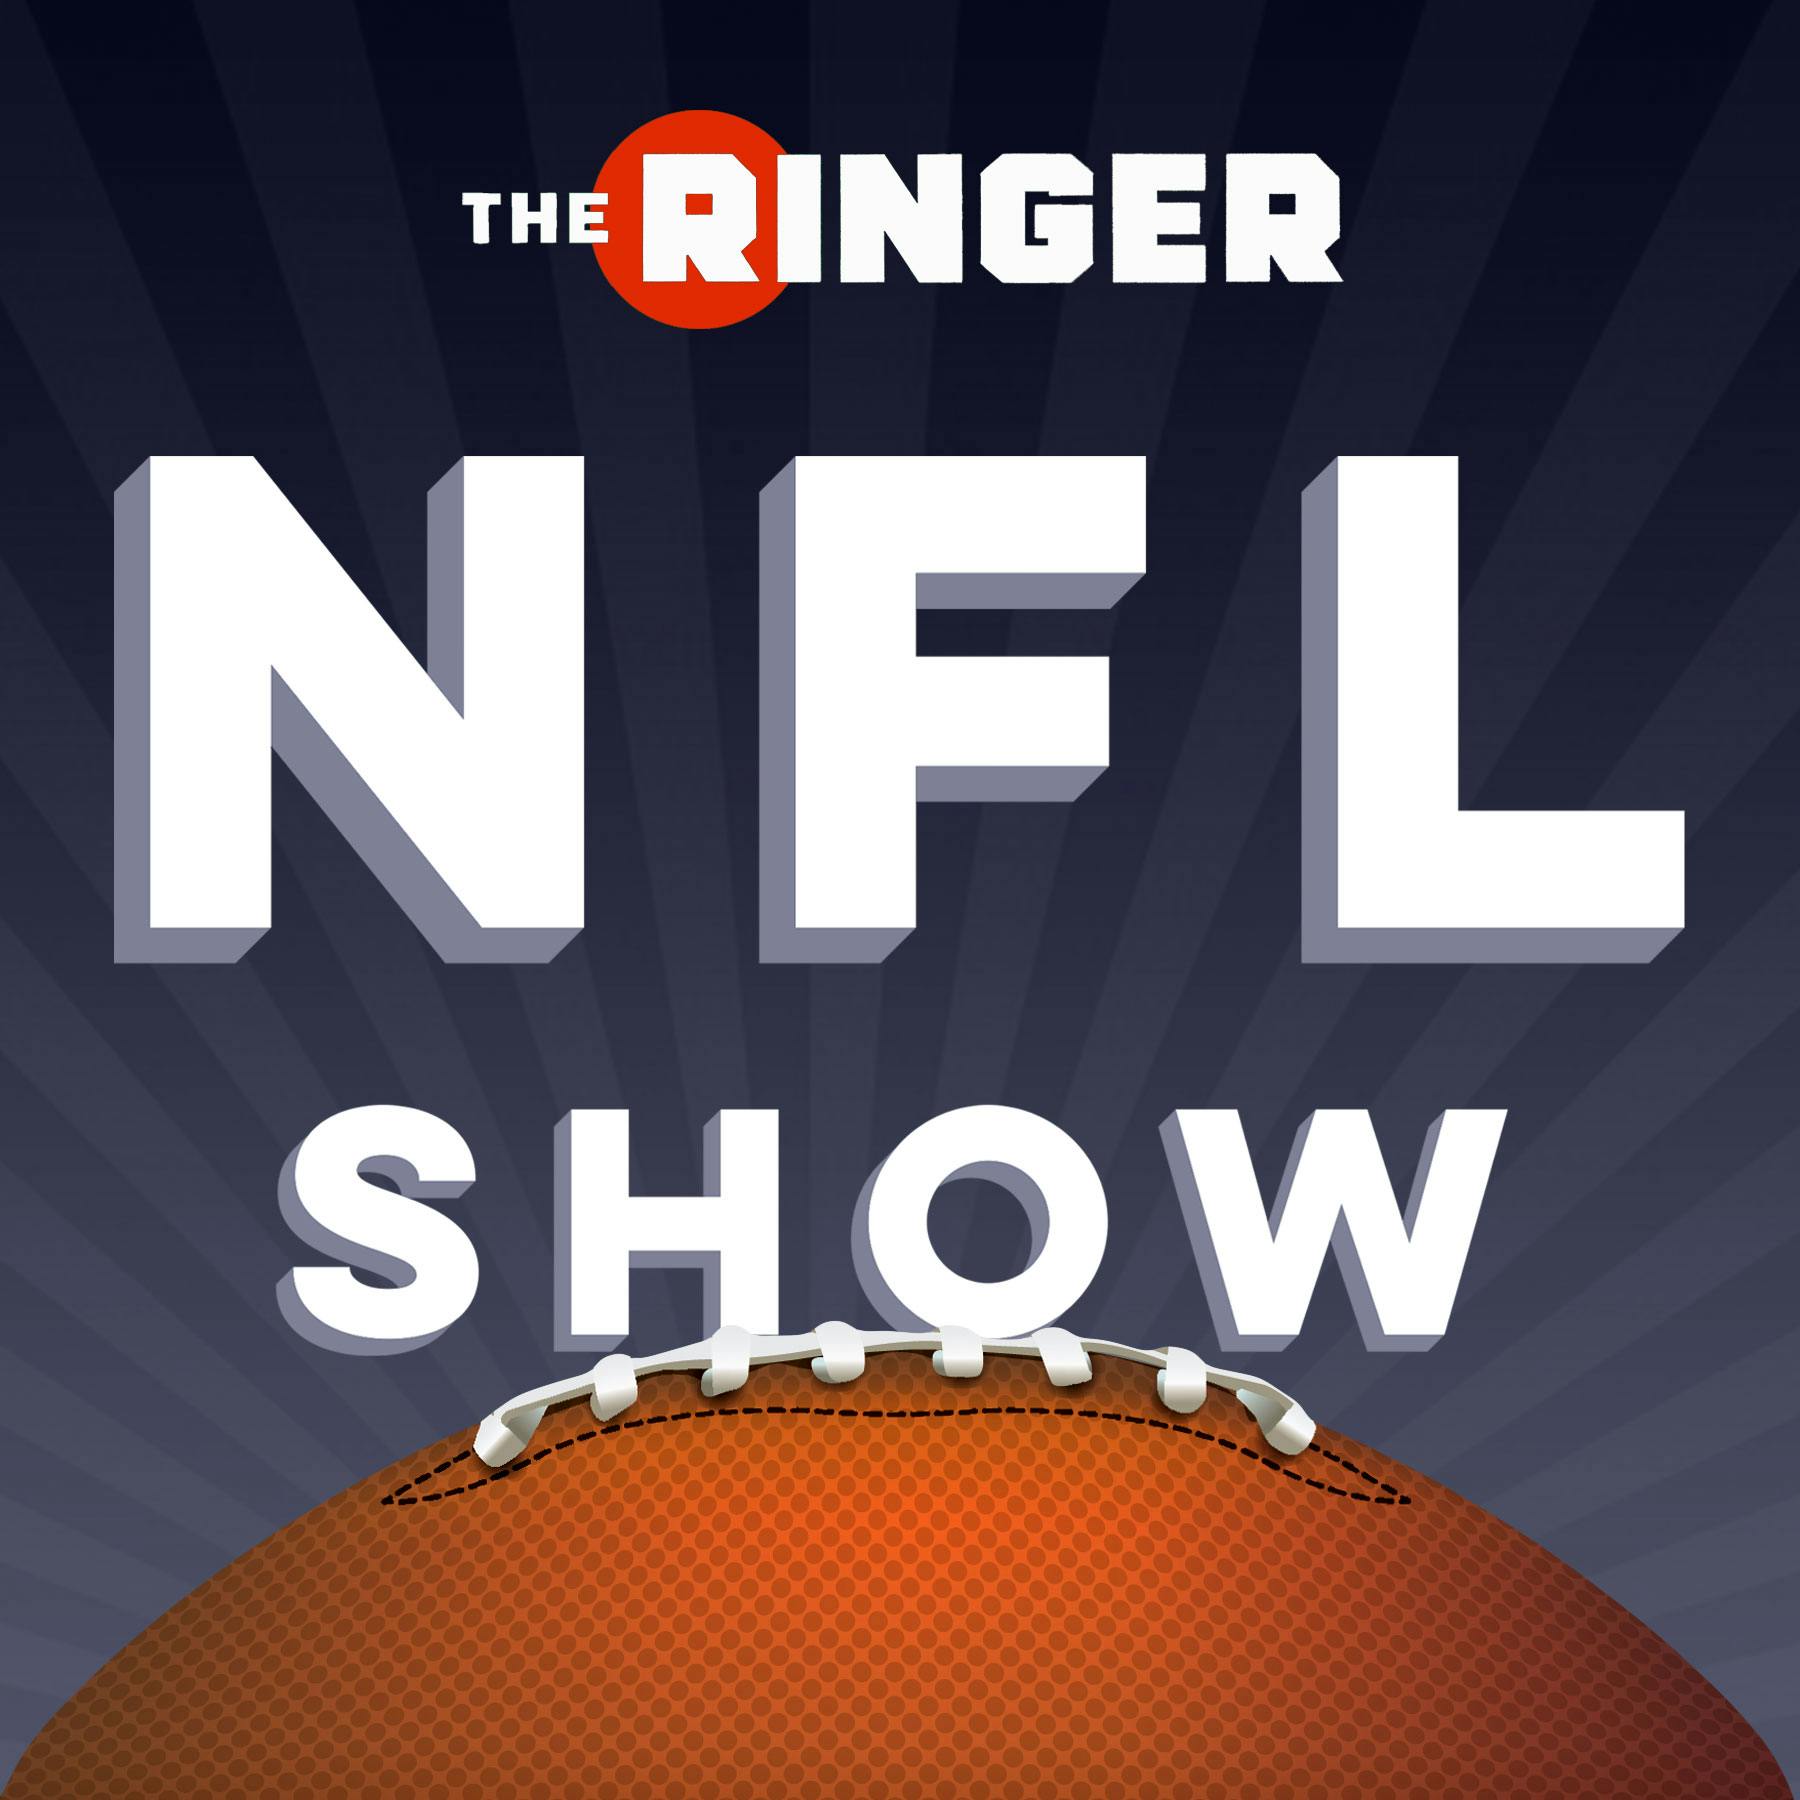 Von Miller Injury Impact, Top Young Quarterbacks, and What to Expect From the 2020 Season | The Ringer NFL Show